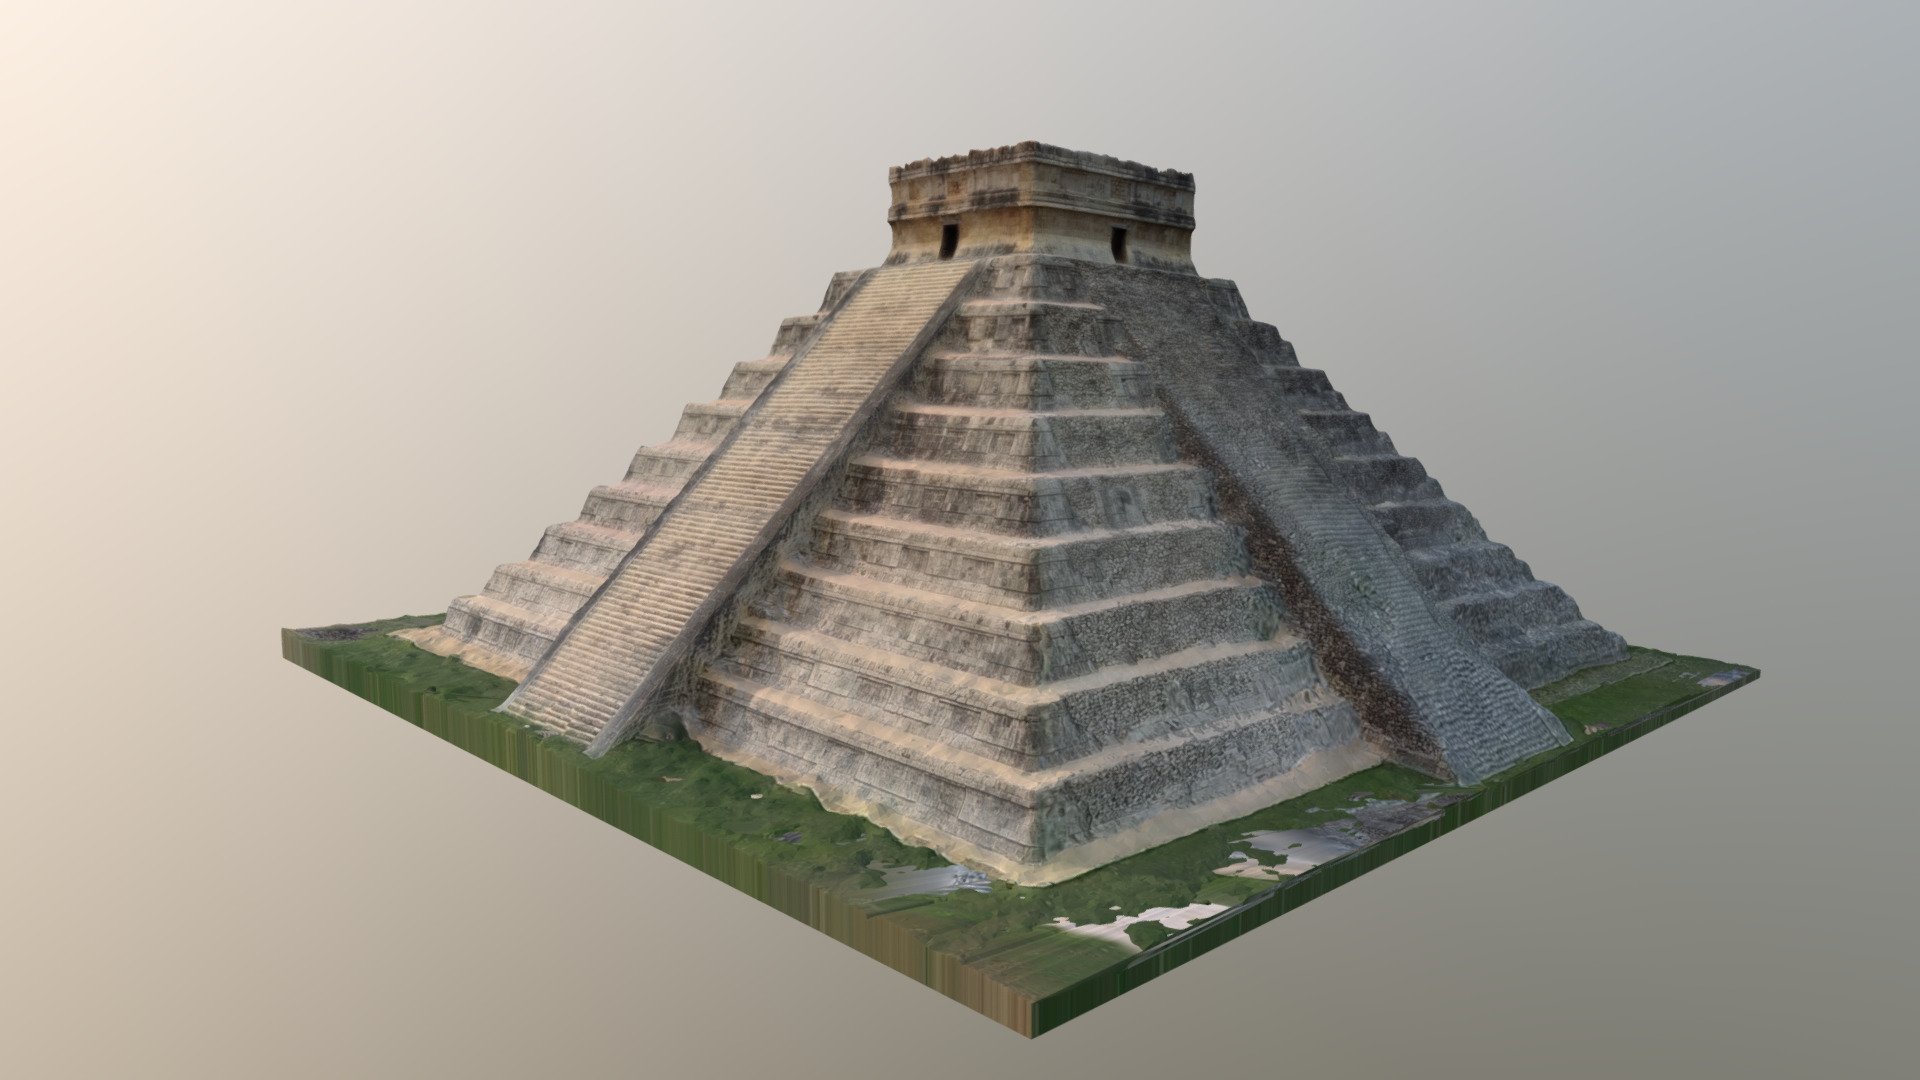 El Castillo, known as the Temple of Kukulcán (or also just as Kukulcán), is a Mesoamerican step-pyramid that dominates the center of the Chichen Itza archaeological site in the Mexican state of Yucatán. The pyramid building is more formally designated by archaeologists as Chichen Itza Structure 5B18.

Built by the pre-Columbian Maya civilization sometime between the 8th and 12th centuries AD, the pyramid served as a temple to the deity Kukulcán, the Yucatec Maya Feathered Serpent deity closely related to Quetzalcoatl, a deity known to the Aztecs and other central Mexican cultures of the Postclassic period. It has a substructure that likely was constructed several centuries earlier for the same purpose.

Photogrammetry model made with several 4k videos, an higher quality version is available 3d model